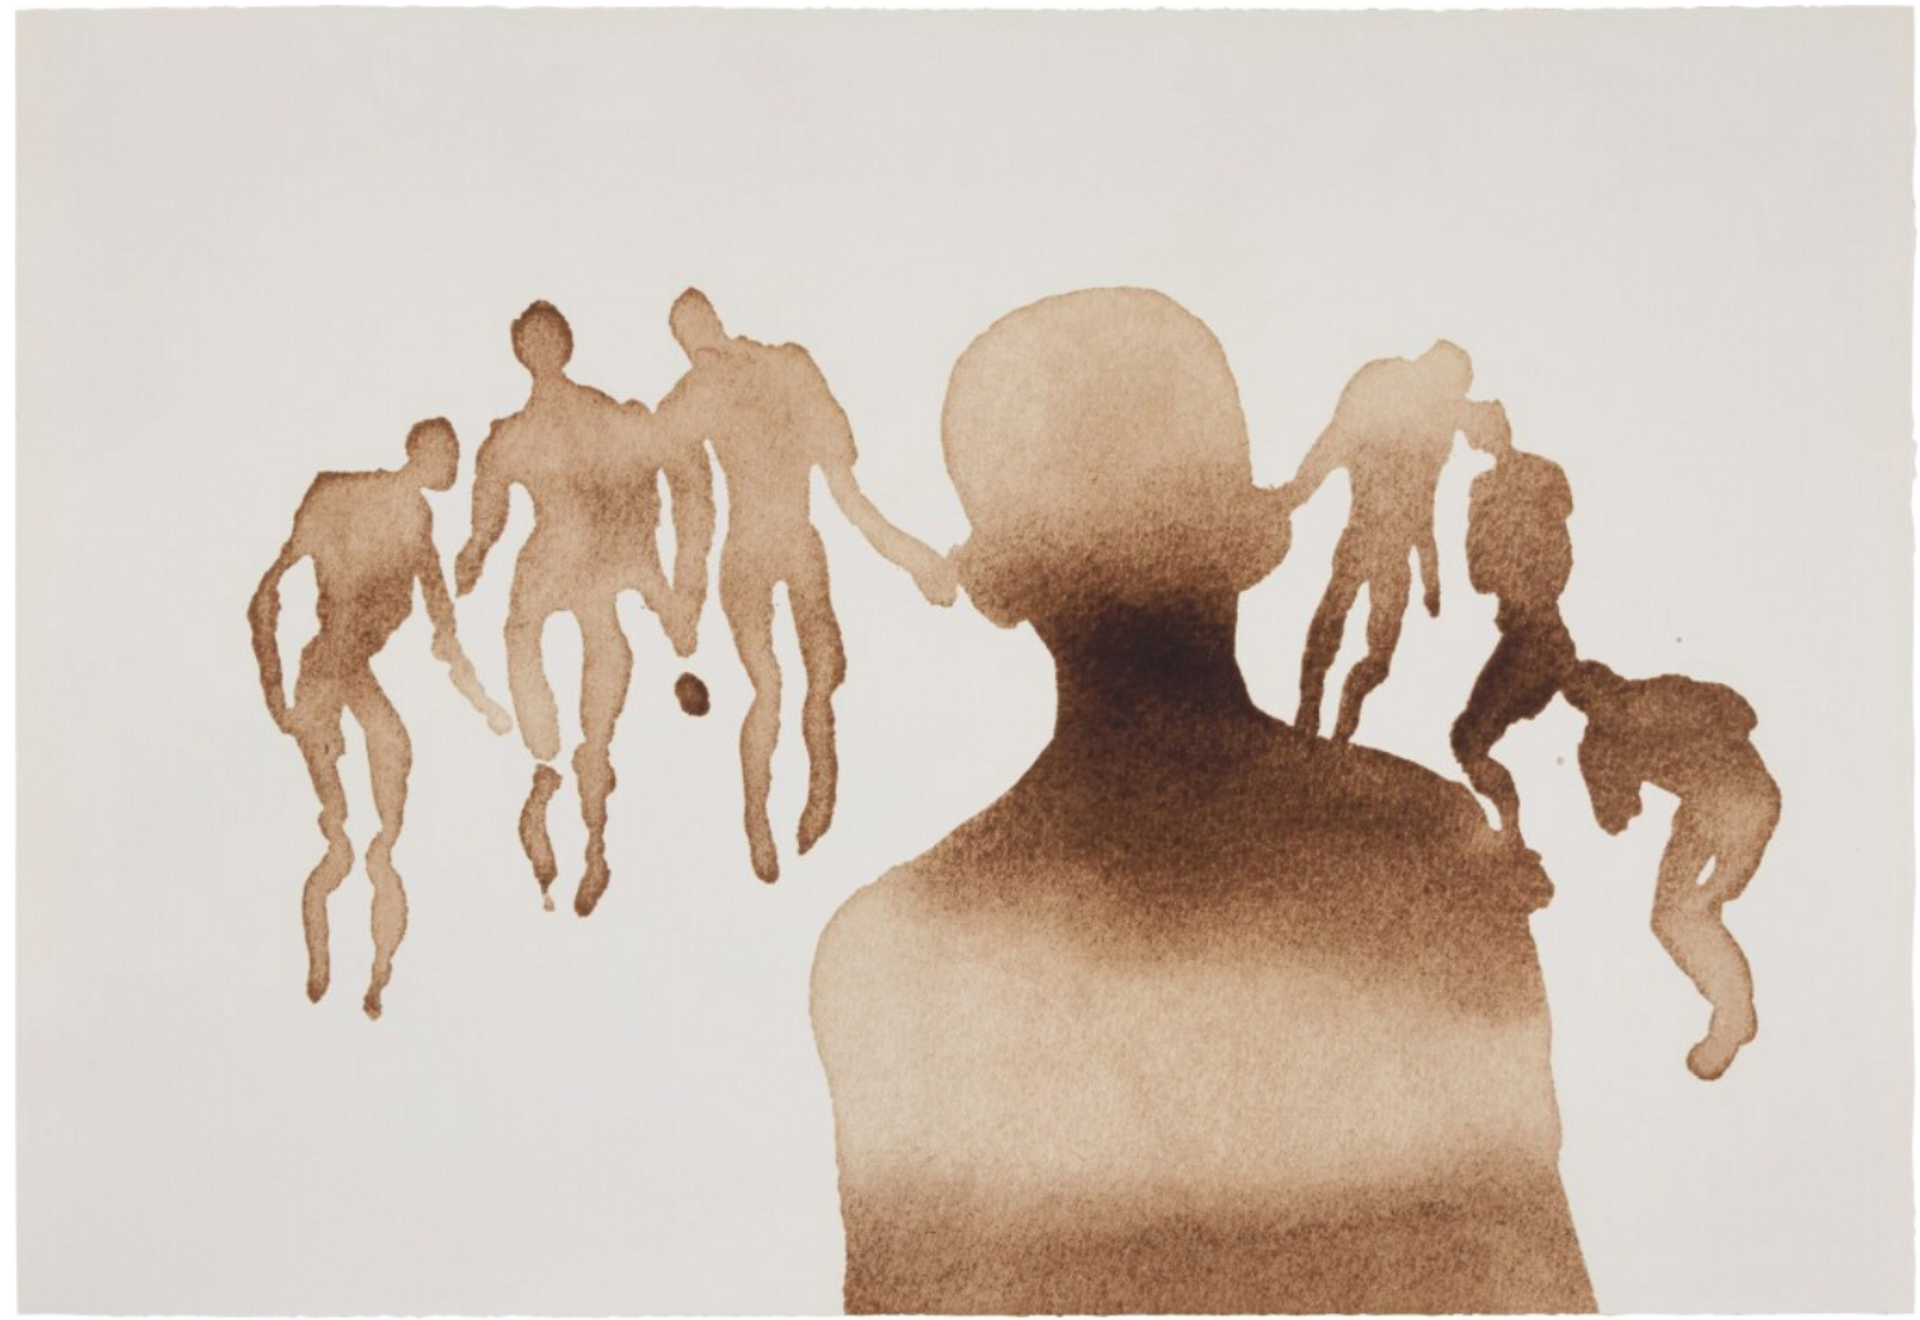 A screenprint depicting one central figure surrounded by six additional figures, three on the right and three on the left. The figures are depicted in beige, standing in various poses with distinct body formation features, set against a white background